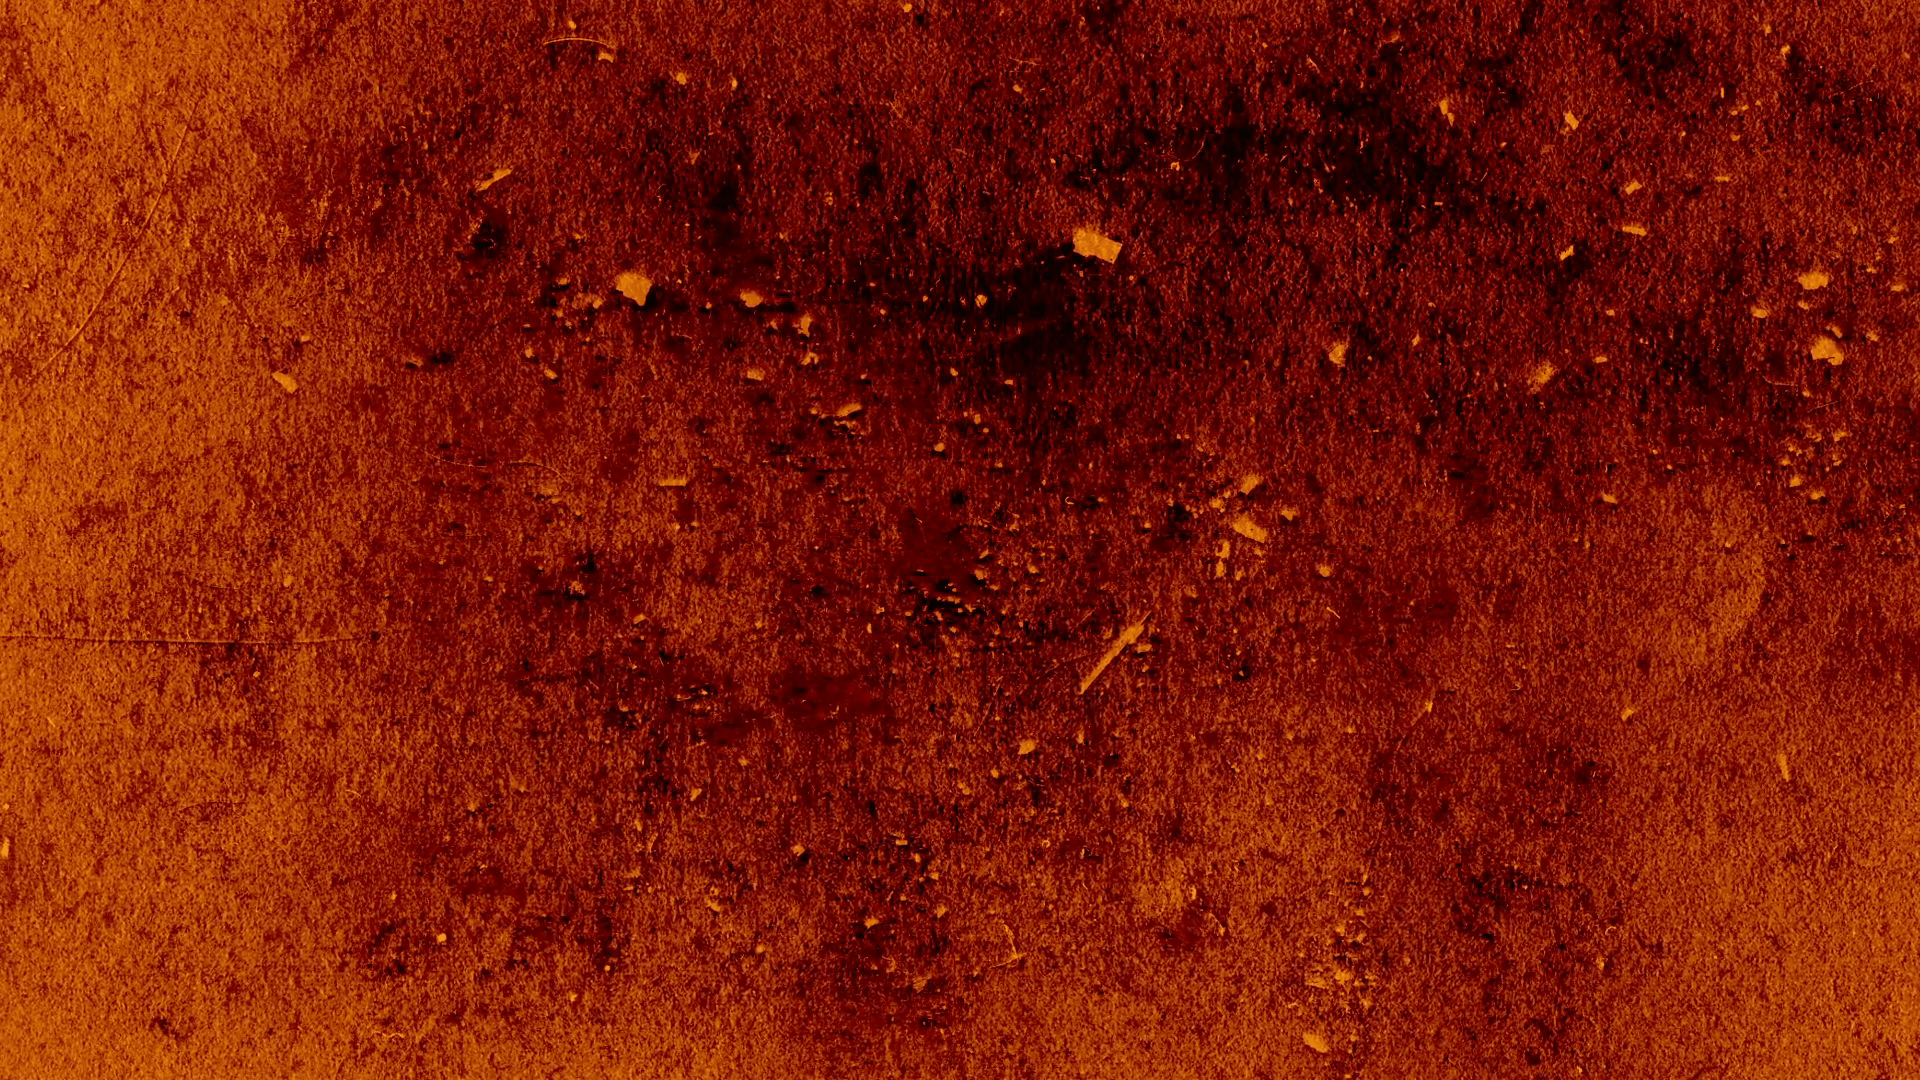 Infinite loop zooming on a red grunge and rough texture